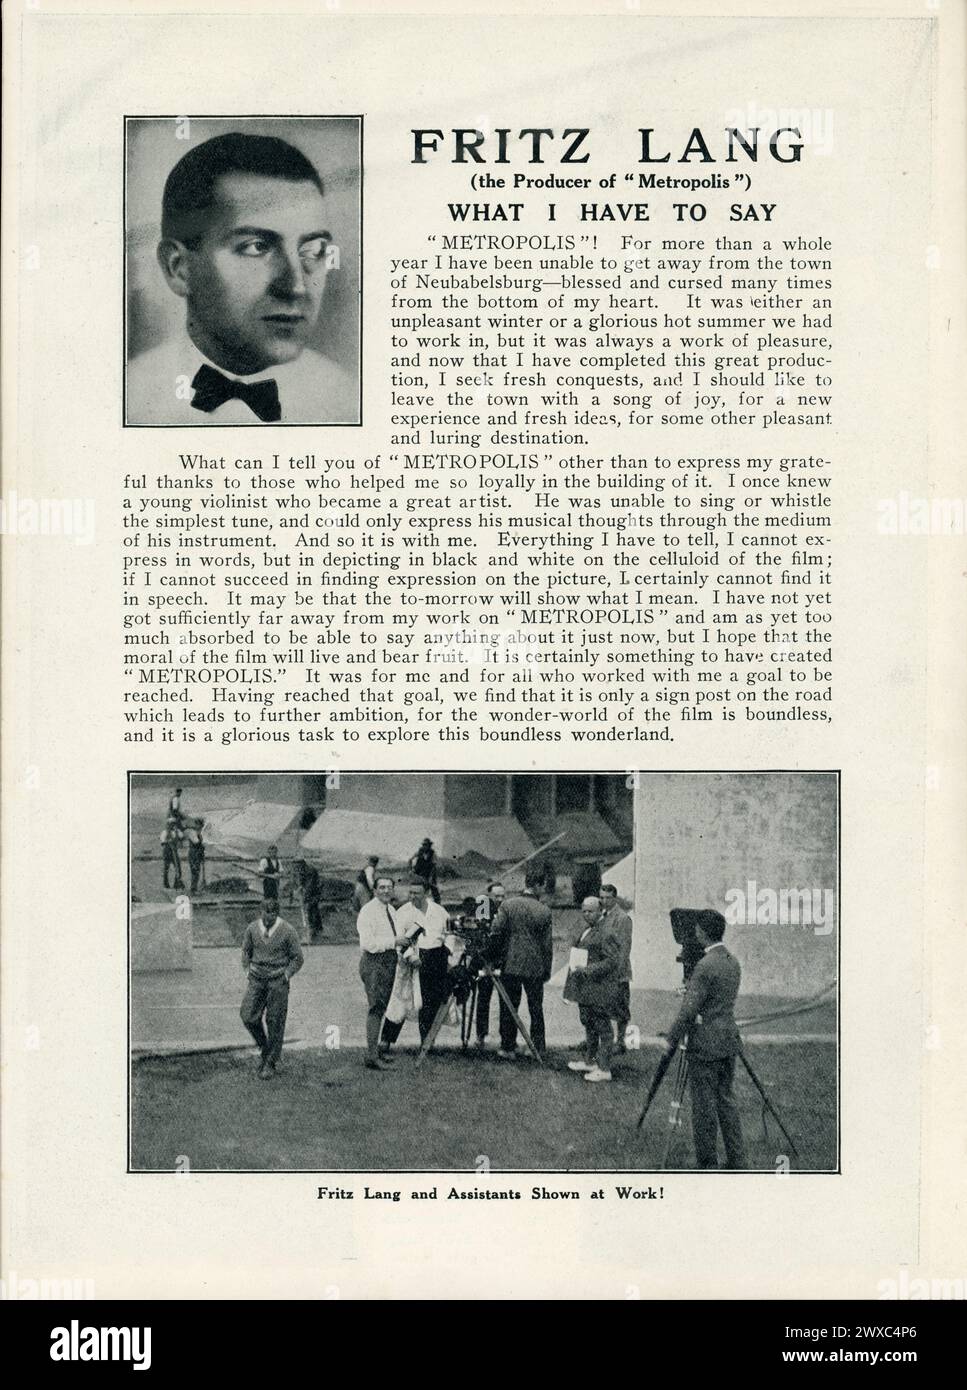 Director FRITZ LANG with Film Crew including Cinematographer KARL FREUND on page from original release British programme for METROPOLIS 1927 director FRITZ LANG novel and screenplay Thea von Harbou Universum Film (UFA) Stock Photo